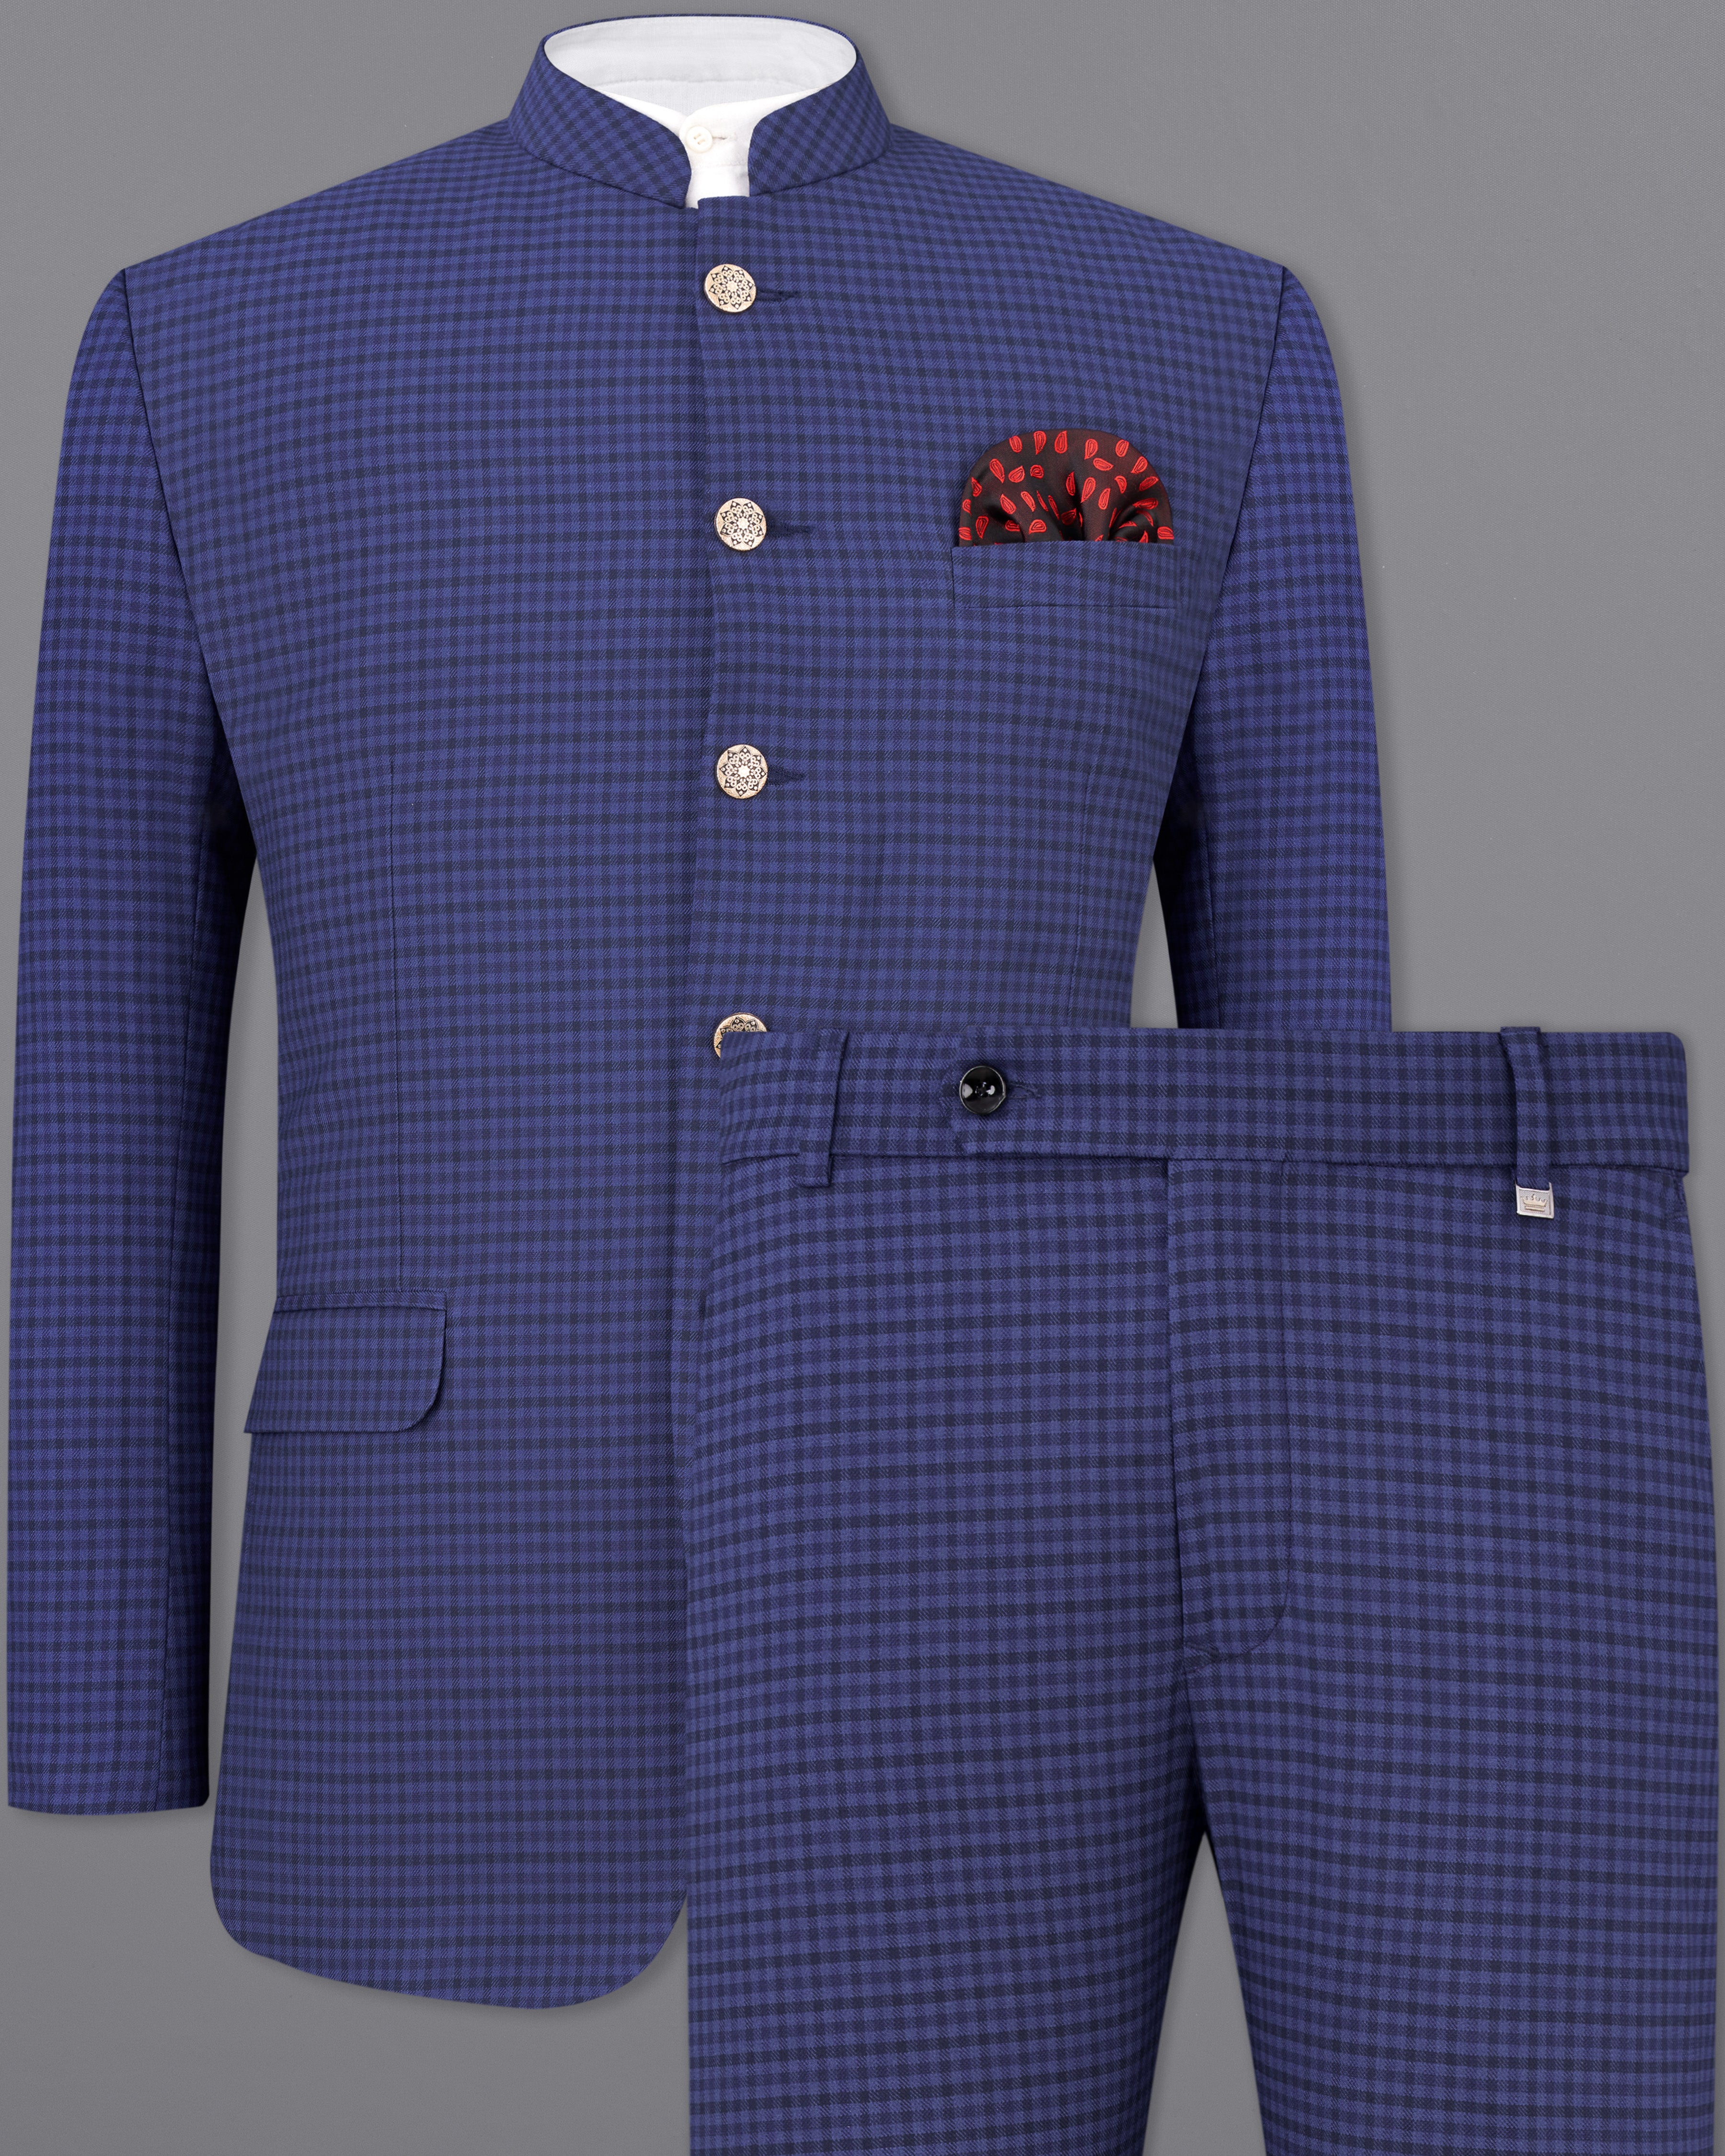 Victoria Blue Gingham Checkered Bandhgala Suit ST2496-BG-36, ST2496-BG-38, ST2496-BG-40, ST2496-BG-42, ST2496-BG-44, ST2496-BG-46, ST2496-BG-48, ST2496-BG-50, ST2496-BG-52, ST2496-BG-54, ST2496-BG-56, ST2496-BG-58, ST2496-BG-60